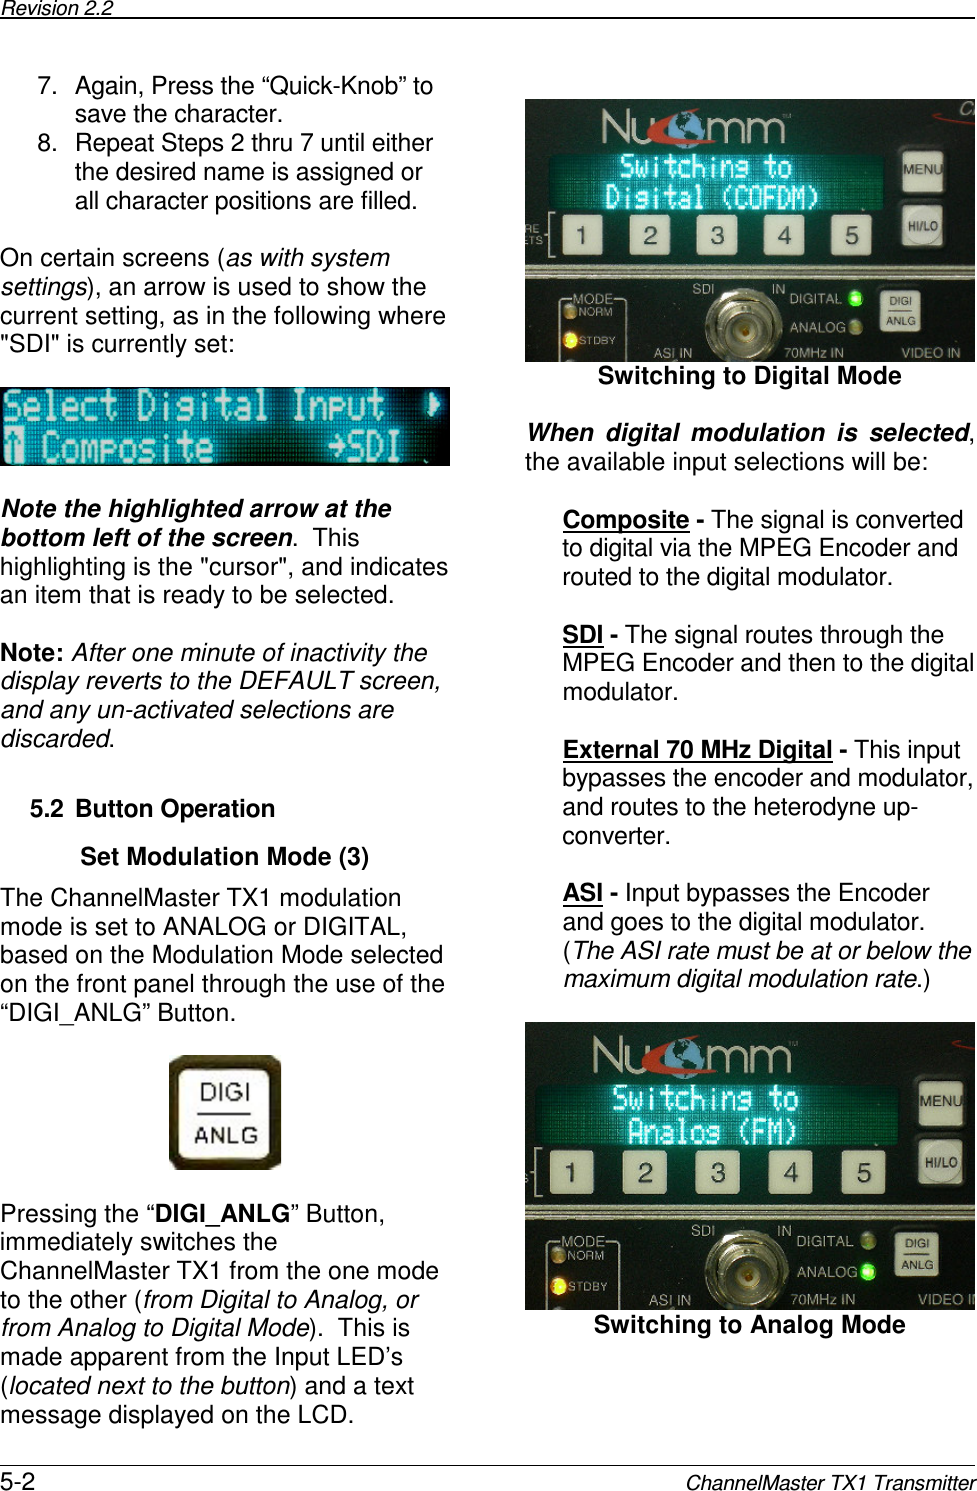 Revision 2.2      5-2 ChannelMaster TX1 Transmitter 7.  Again, Press the “Quick-Knob” to save the character. 8.  Repeat Steps 2 thru 7 until either the desired name is assigned or all character positions are filled.  On certain screens (as with system settings), an arrow is used to show the current setting, as in the following where &quot;SDI&quot; is currently set:      Note the highlighted arrow at the bottom left of the screen.  This highlighting is the &quot;cursor&quot;, and indicates an item that is ready to be selected.  Note: After one minute of inactivity the display reverts to the DEFAULT screen, and any un-activated selections are discarded.    5.2  Button Operation Set Modulation Mode (3) The ChannelMaster TX1 modulation mode is set to ANALOG or DIGITAL, based on the Modulation Mode selected on the front panel through the use of the “DIGI_ANLG” Button.      Pressing the “DIGI_ANLG” Button, immediately switches the ChannelMaster TX1 from the one mode to the other (from Digital to Analog, or from Analog to Digital Mode).  This is made apparent from the Input LED’s (located next to the button) and a text message displayed on the LCD.   Switching to Digital Mode  When  digital  modulation  is  selected, the available input selections will be:  Composite - The signal is converted to digital via the MPEG Encoder and routed to the digital modulator.  SDI - The signal routes through the MPEG Encoder and then to the digital modulator.  External 70 MHz Digital - This input bypasses the encoder and modulator, and routes to the heterodyne up-converter.  ASI - Input bypasses the Encoder and goes to the digital modulator.  (The ASI rate must be at or below the maximum digital modulation rate.)   Switching to Analog Mode  